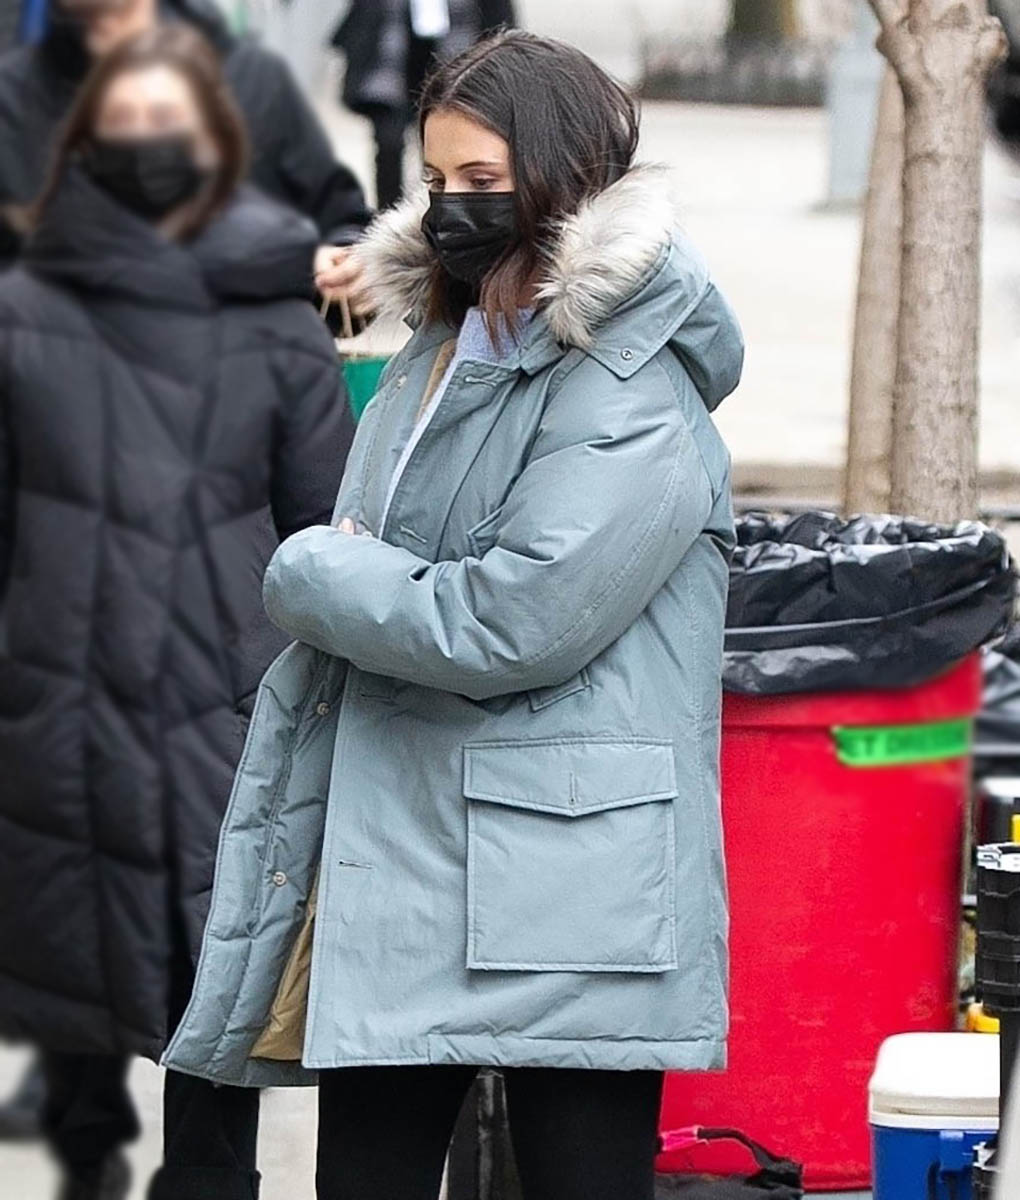 Selena Gomez is seen on set for “Only Murders in the Building” in the Upper West Side